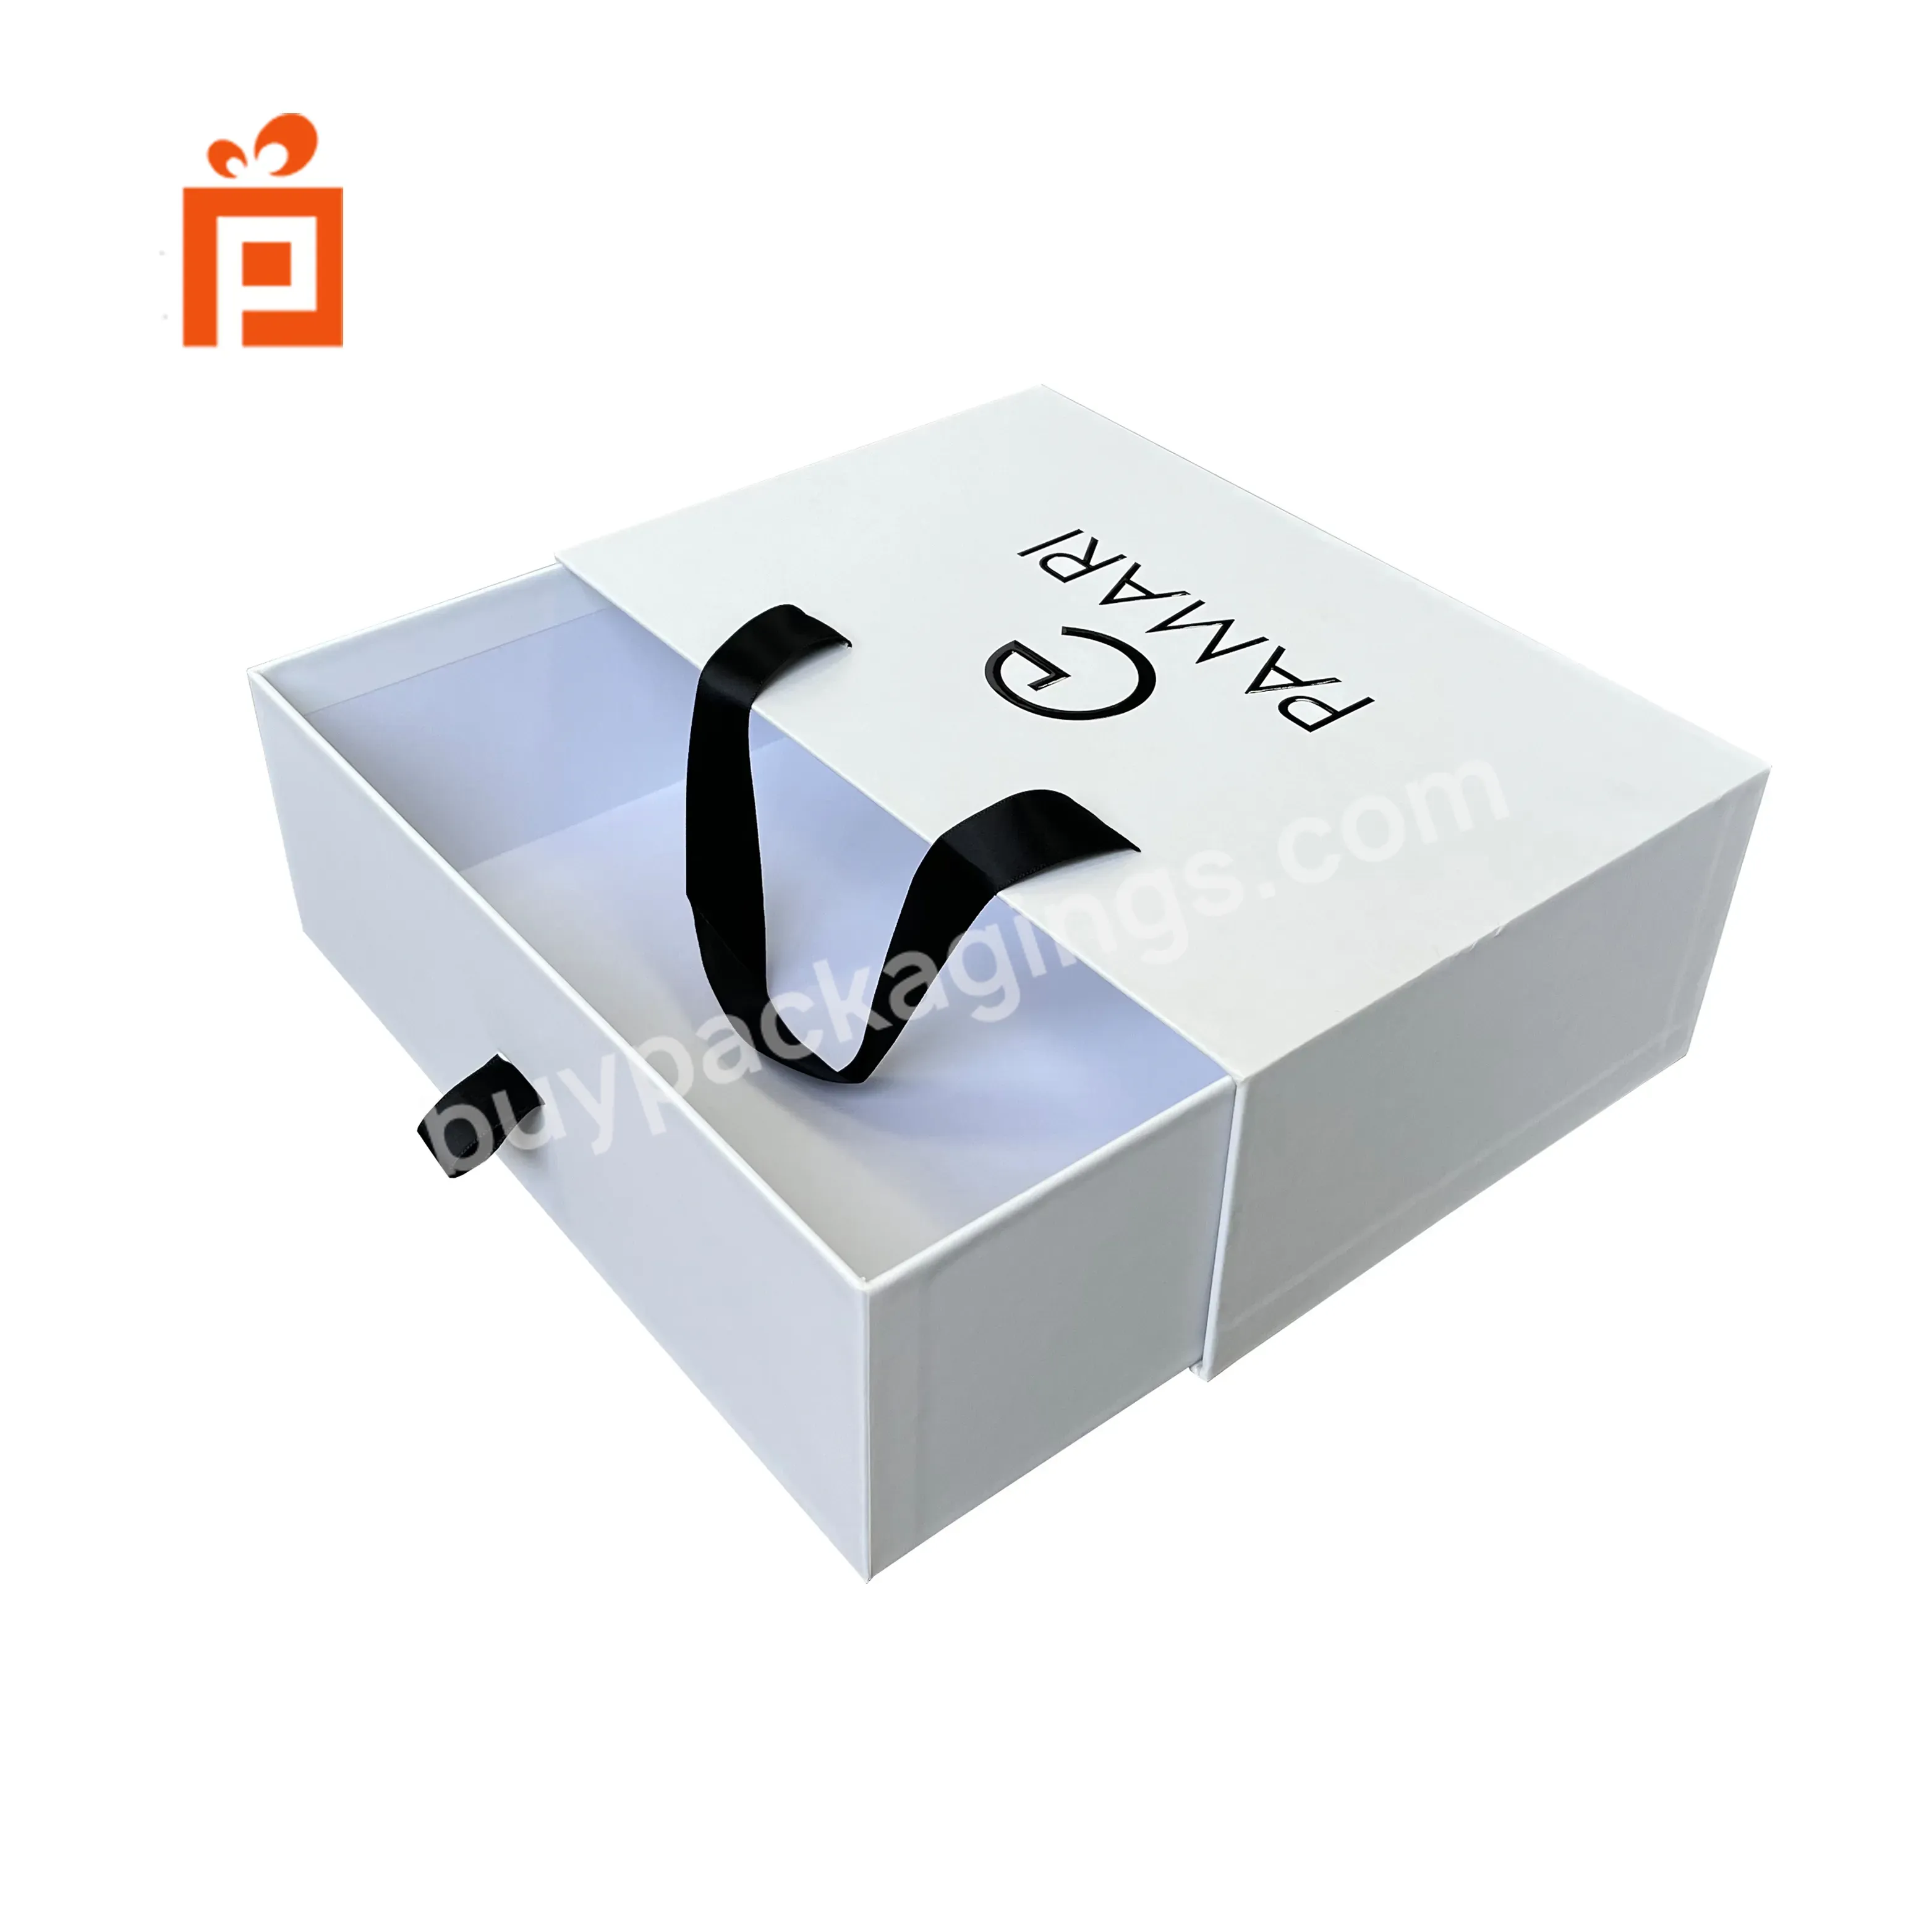 High Quality Luxury Bespoke Drawer Gift Box Packaging With Handles